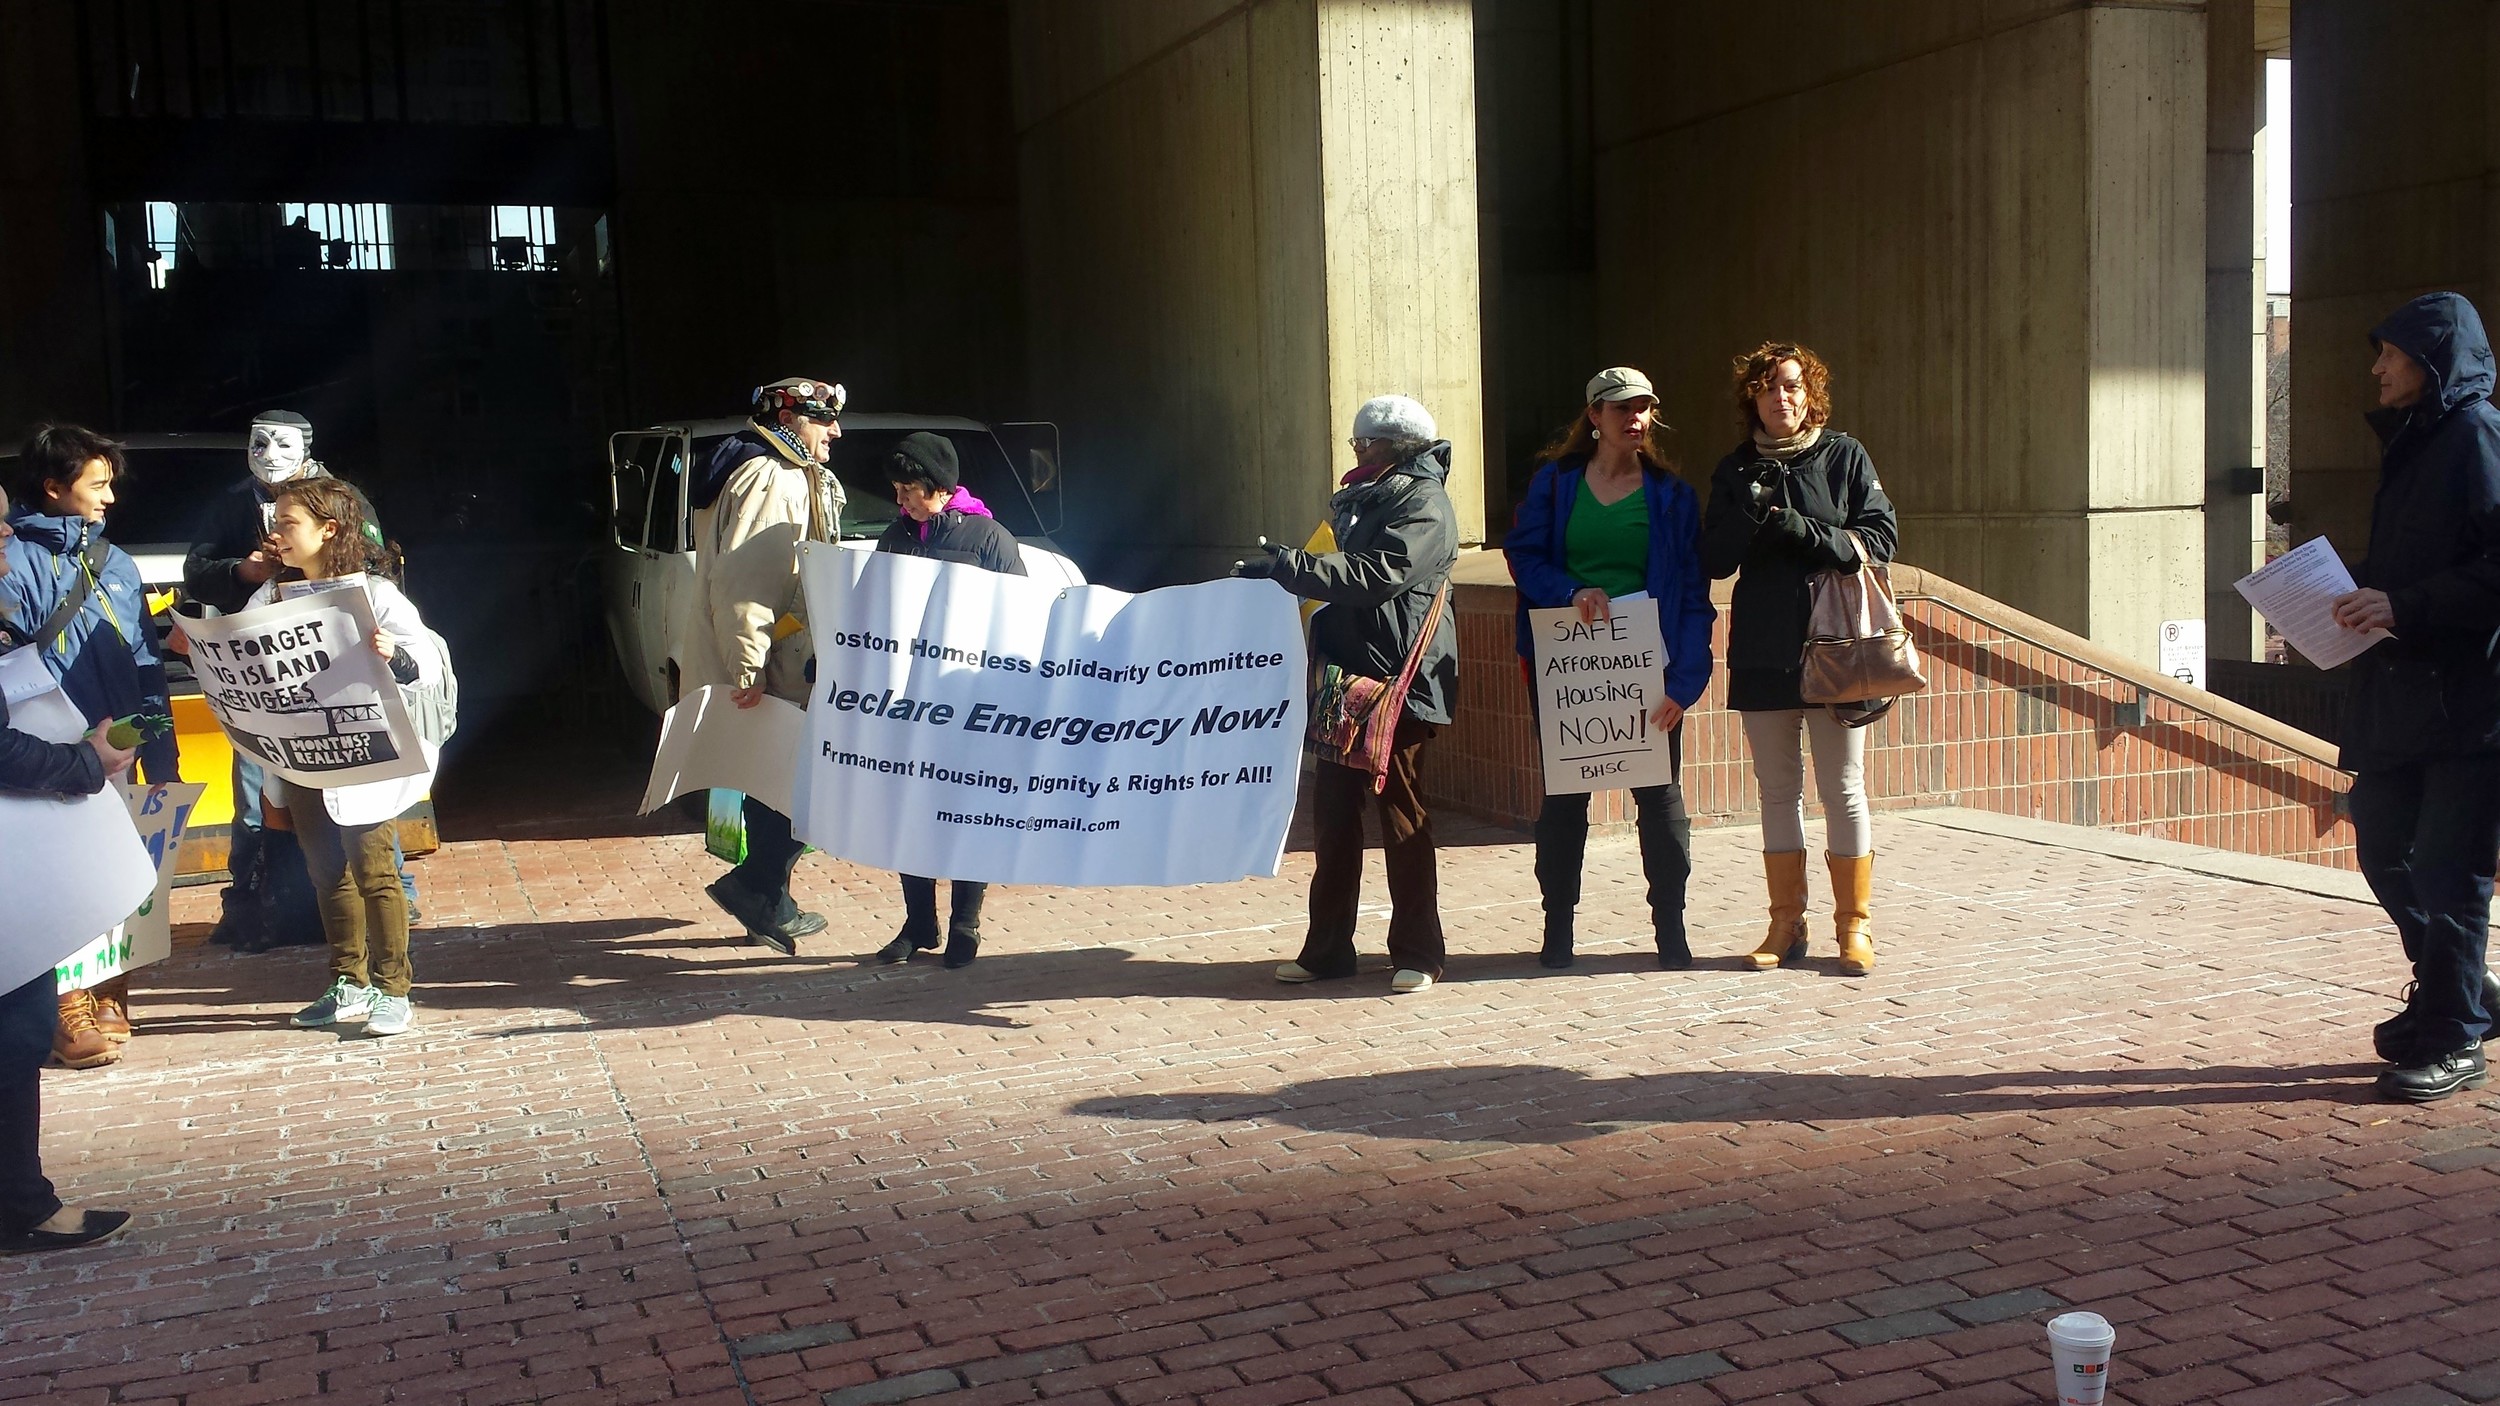 The Boston Homeless Solidarity Committee (BHSC) along with many homeless people, activists, students 